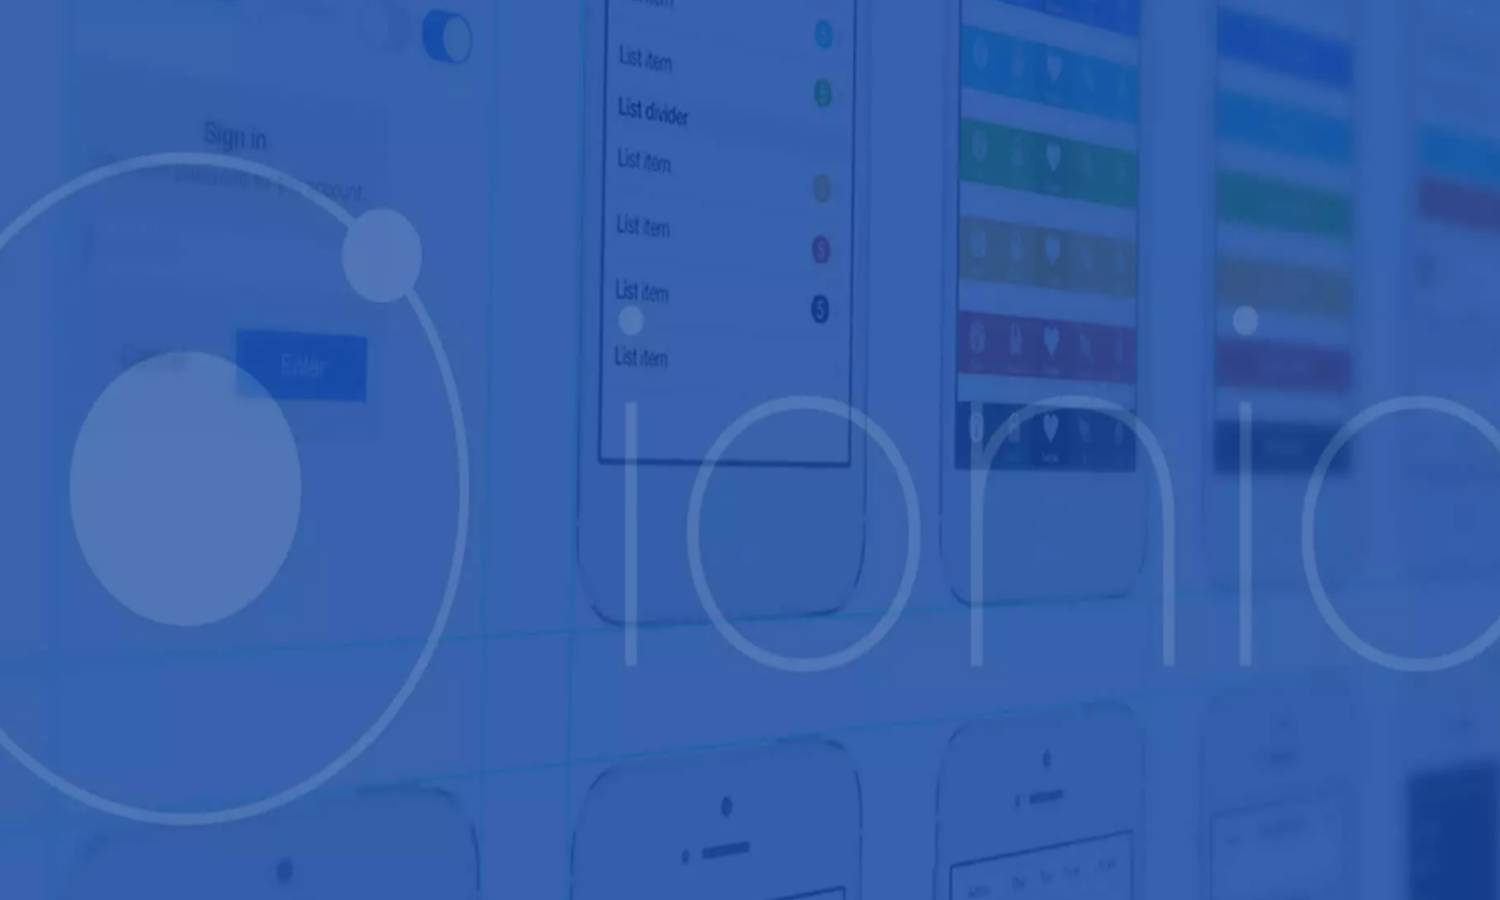 Newly-introduced features of Ionic 4 Framework makes it the best choice for app development